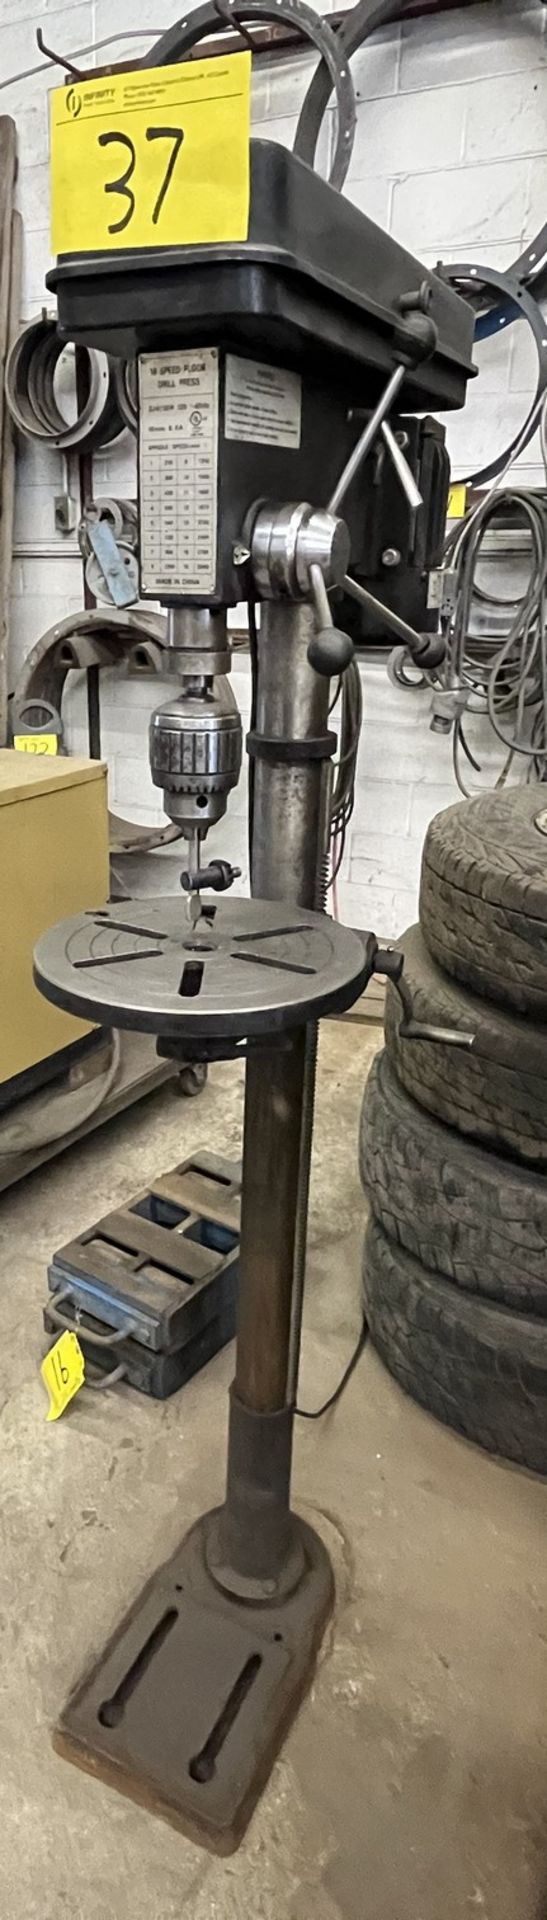 16-SPEED FLOOR TYPE DRILL PRESS W/ JACOBS CHUCK (RIGGING FEE $100)